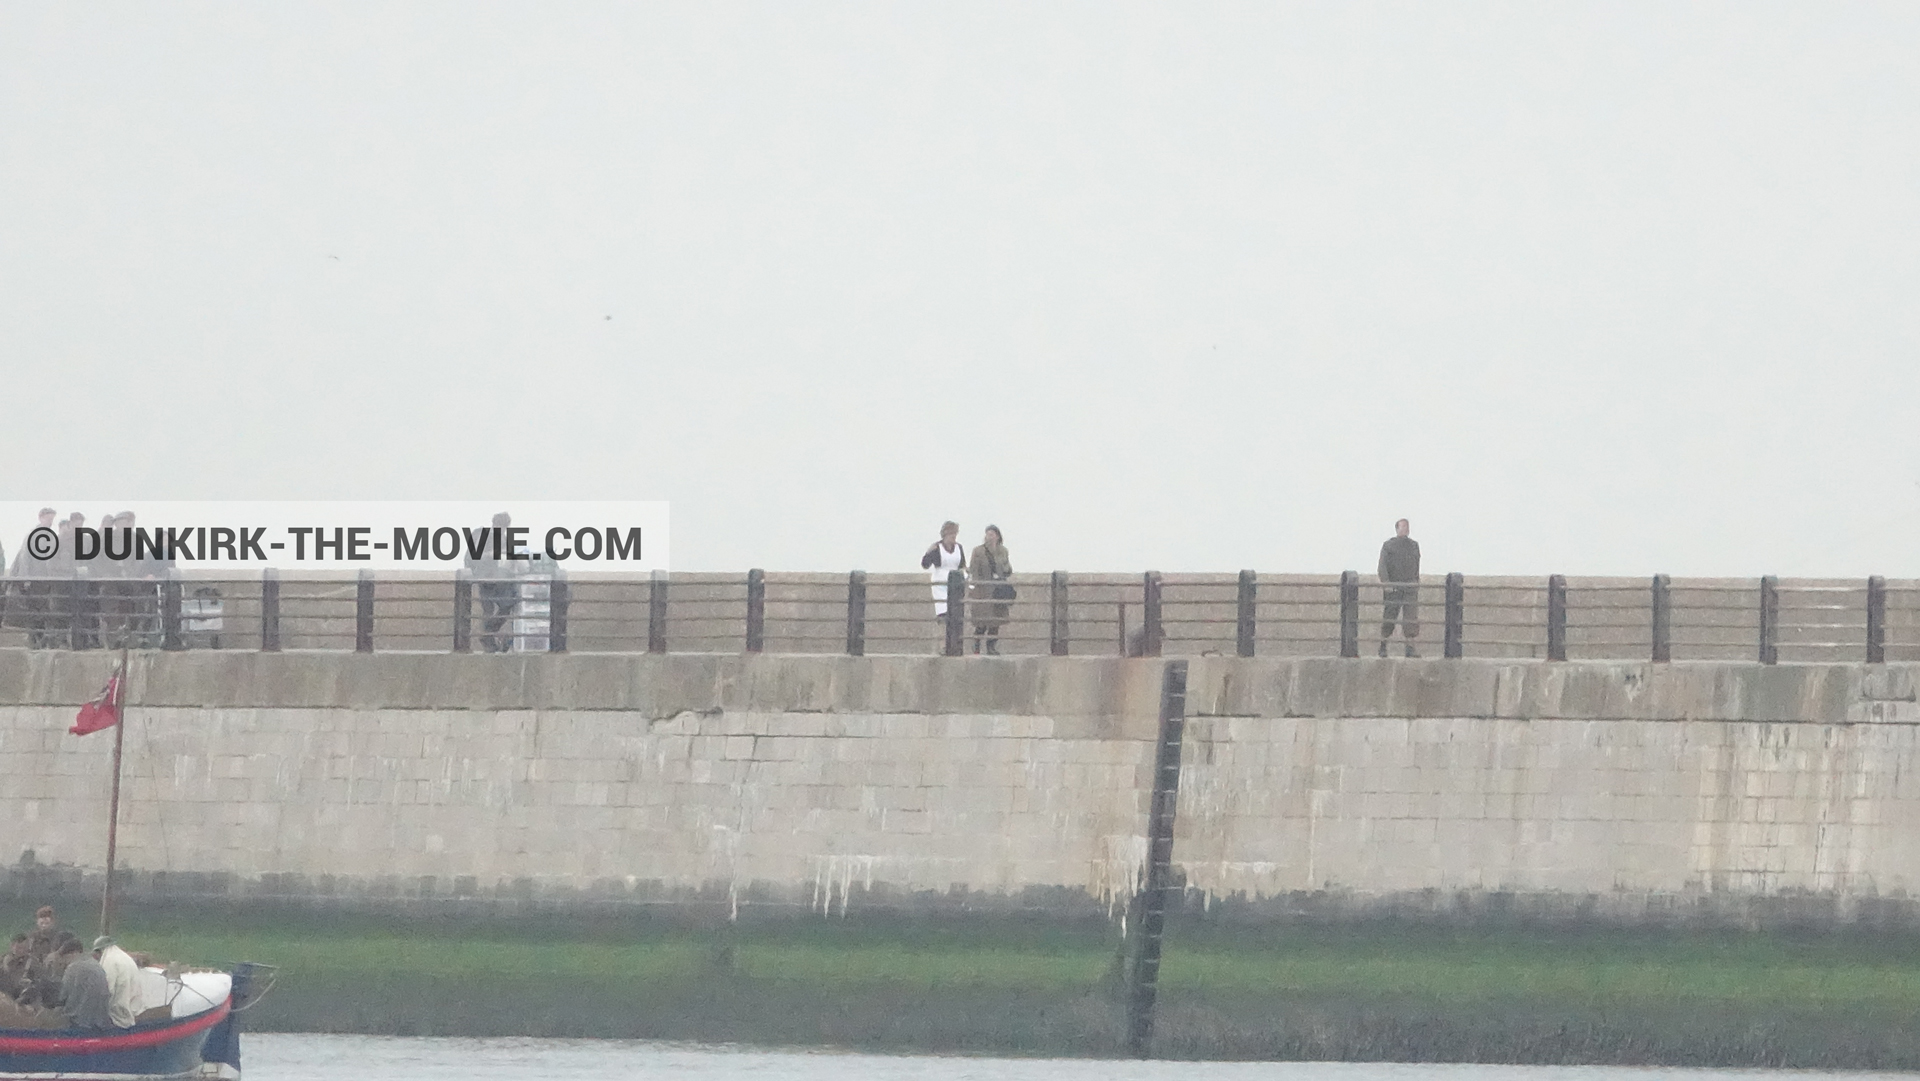 Picture with boat, grey sky, supernumeraries, EST pier, technical team,  from behind the scene of the Dunkirk movie by Nolan